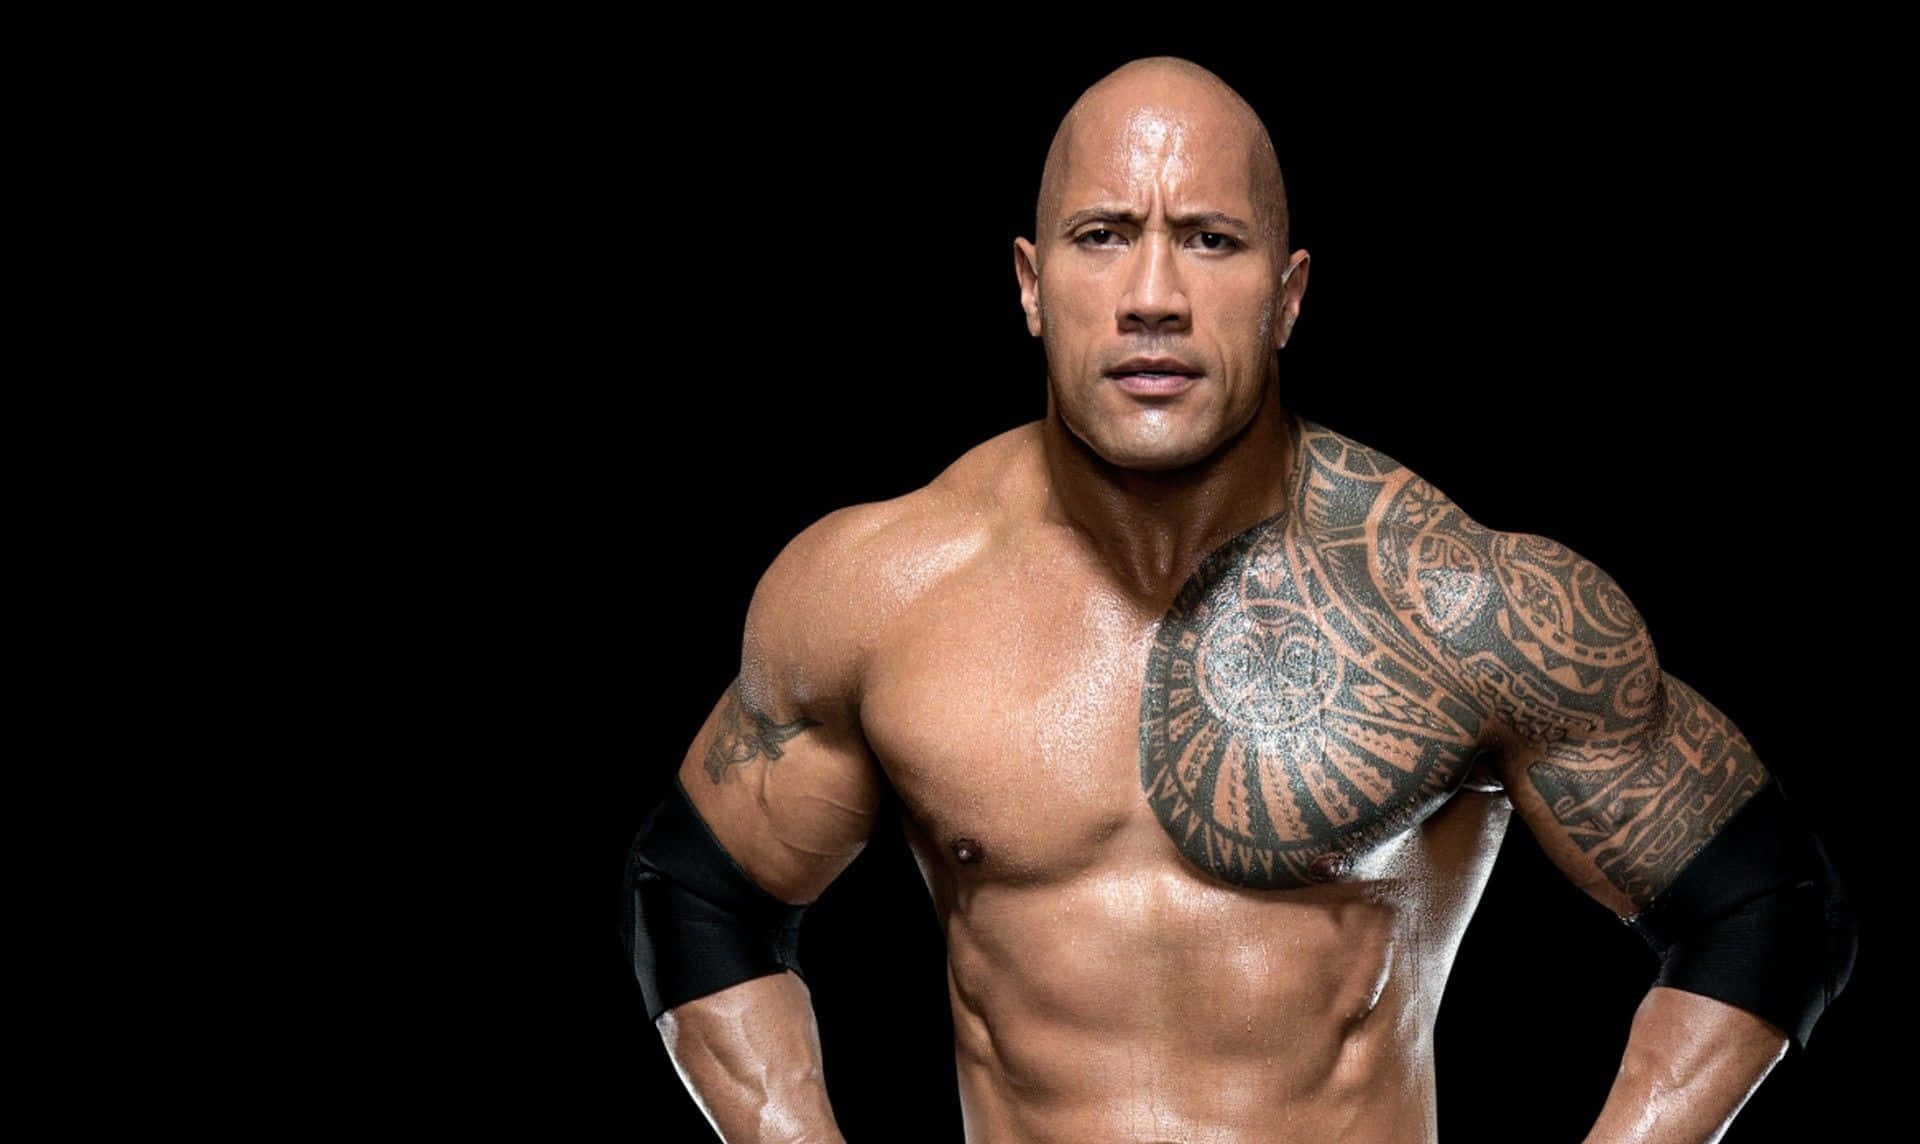 Dwayne 'The Rock' Johnson gets new wax statue at Grevin Museum in France